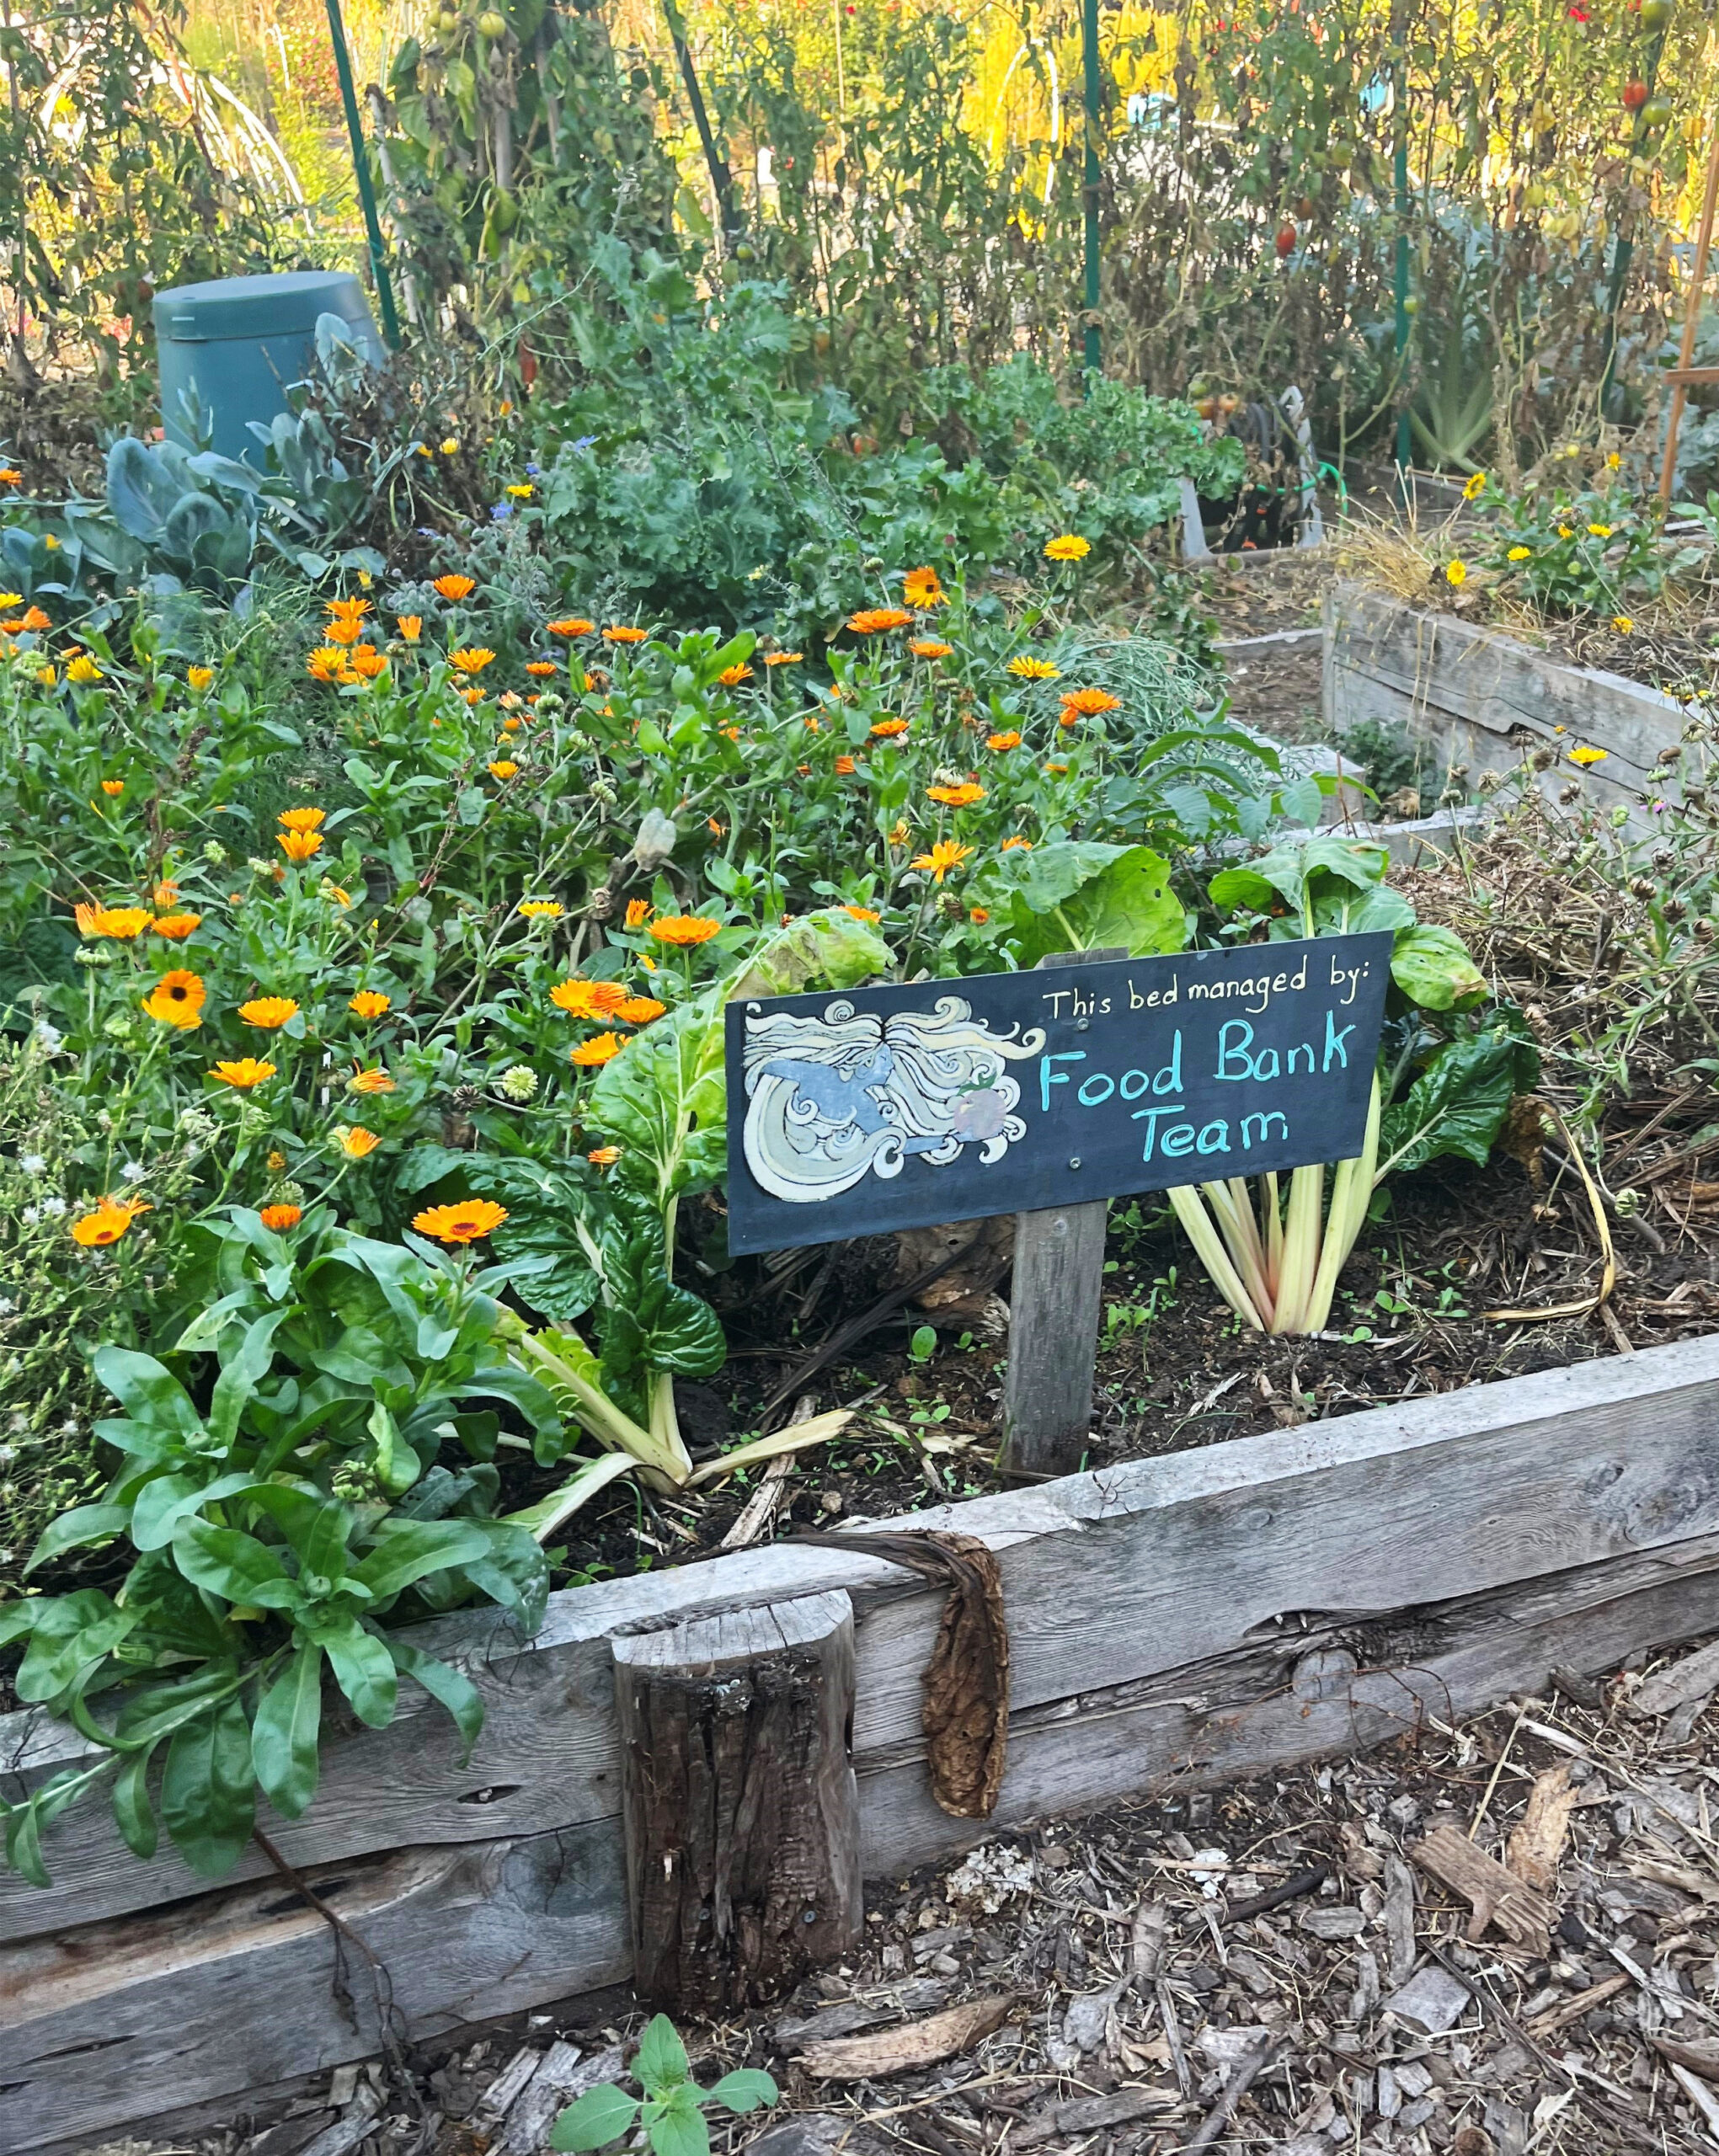 A sign posted in a P-Patch community garden plot that reads "This bed is managed by the Food Bank Team."